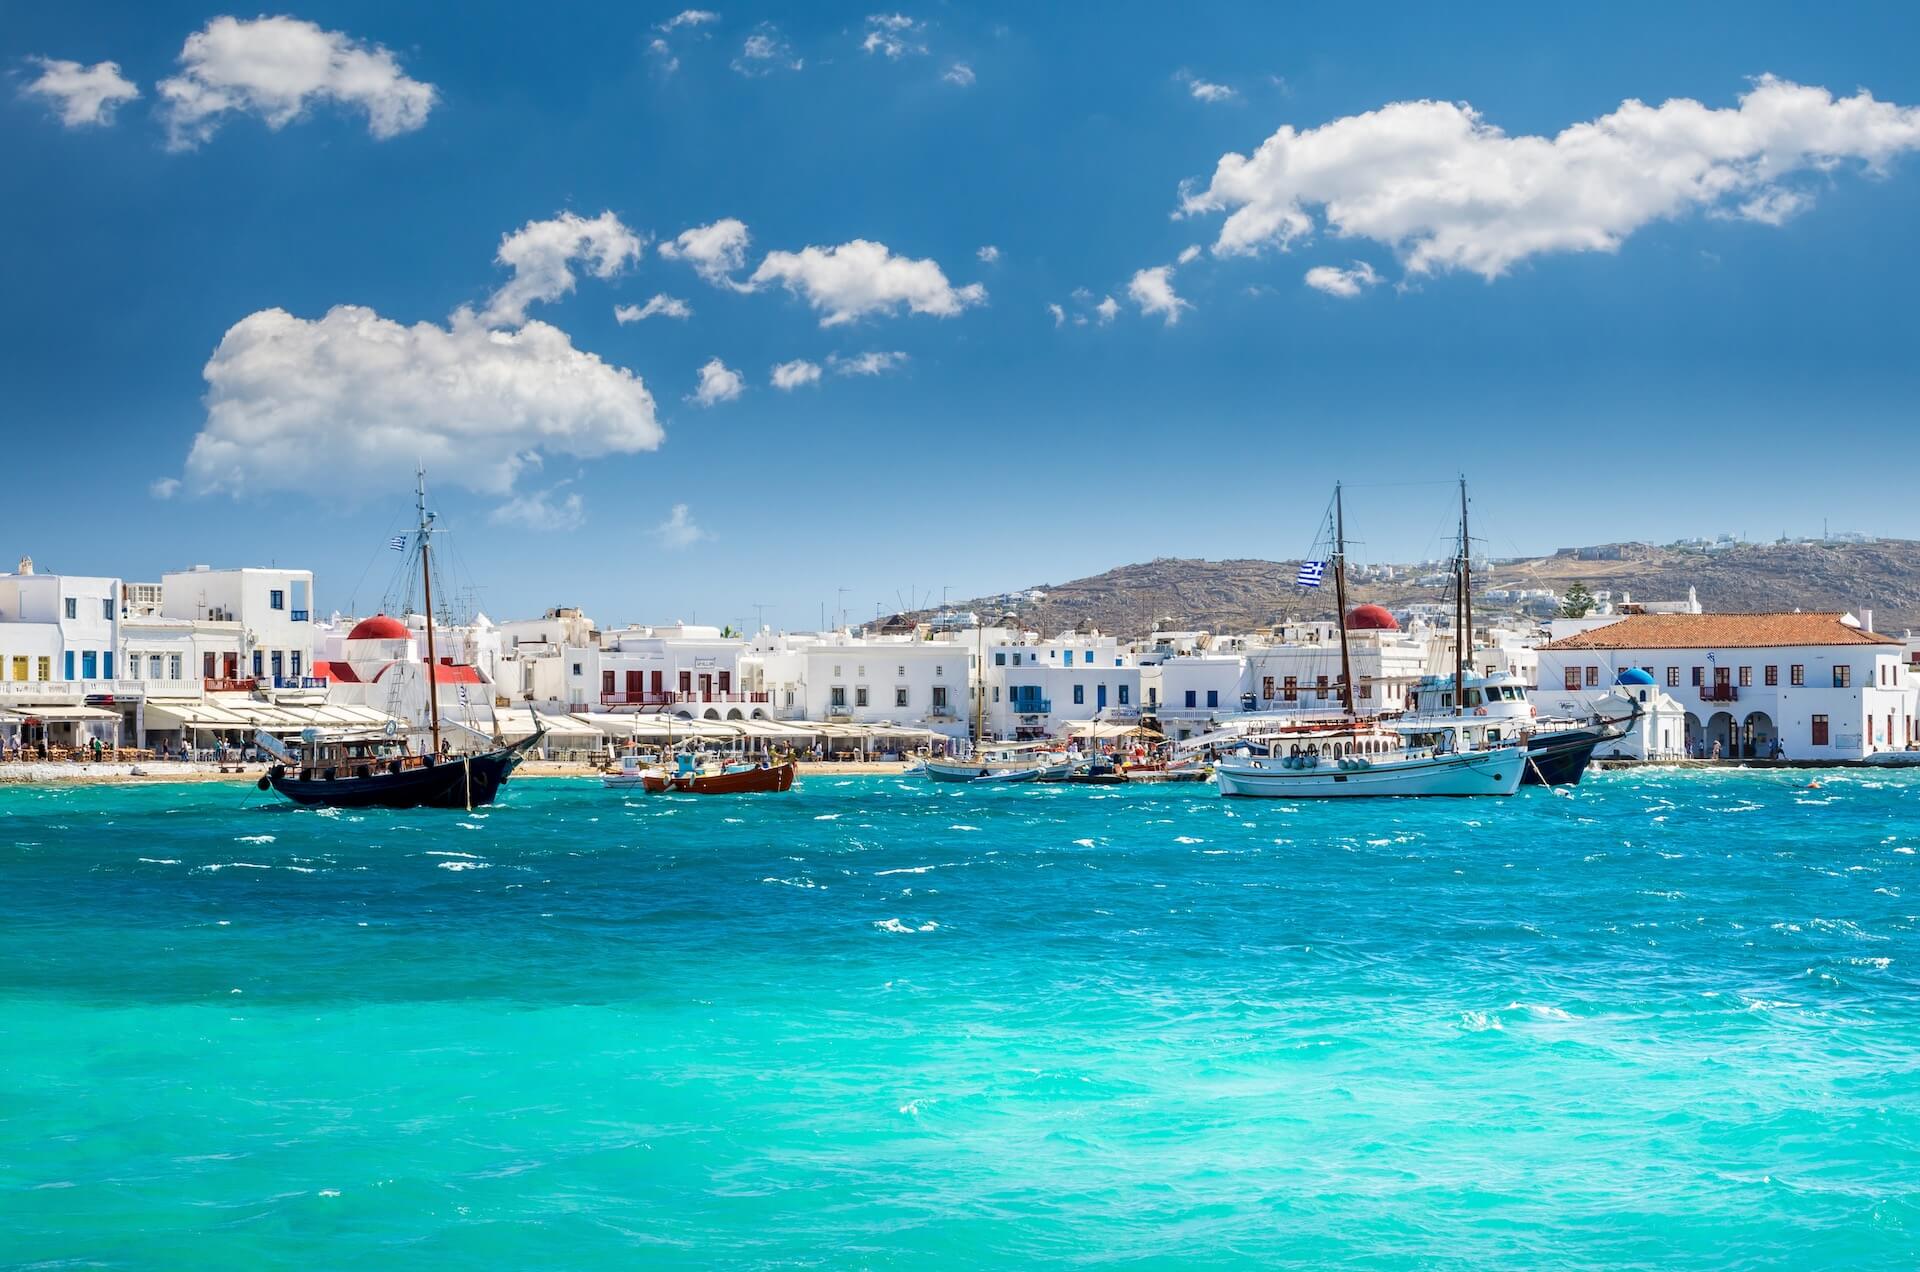 Boats on the coats of Mykonos